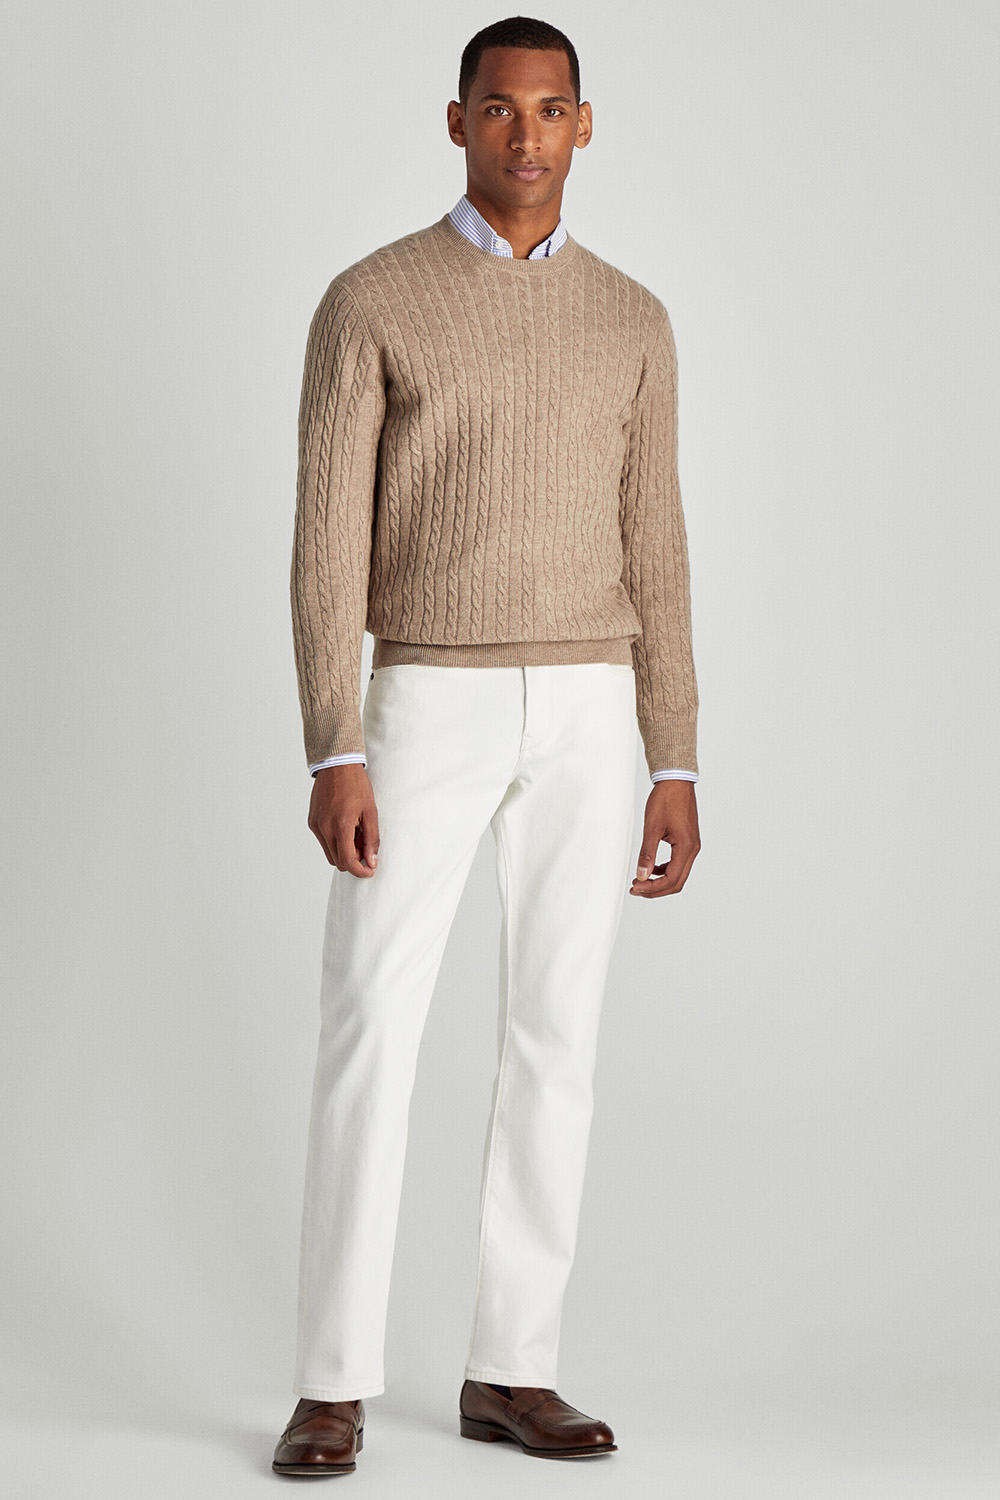 Men's white jeans, blue pinstripe shirt, camel cable knit sweater and brown leather penny loafers outfit